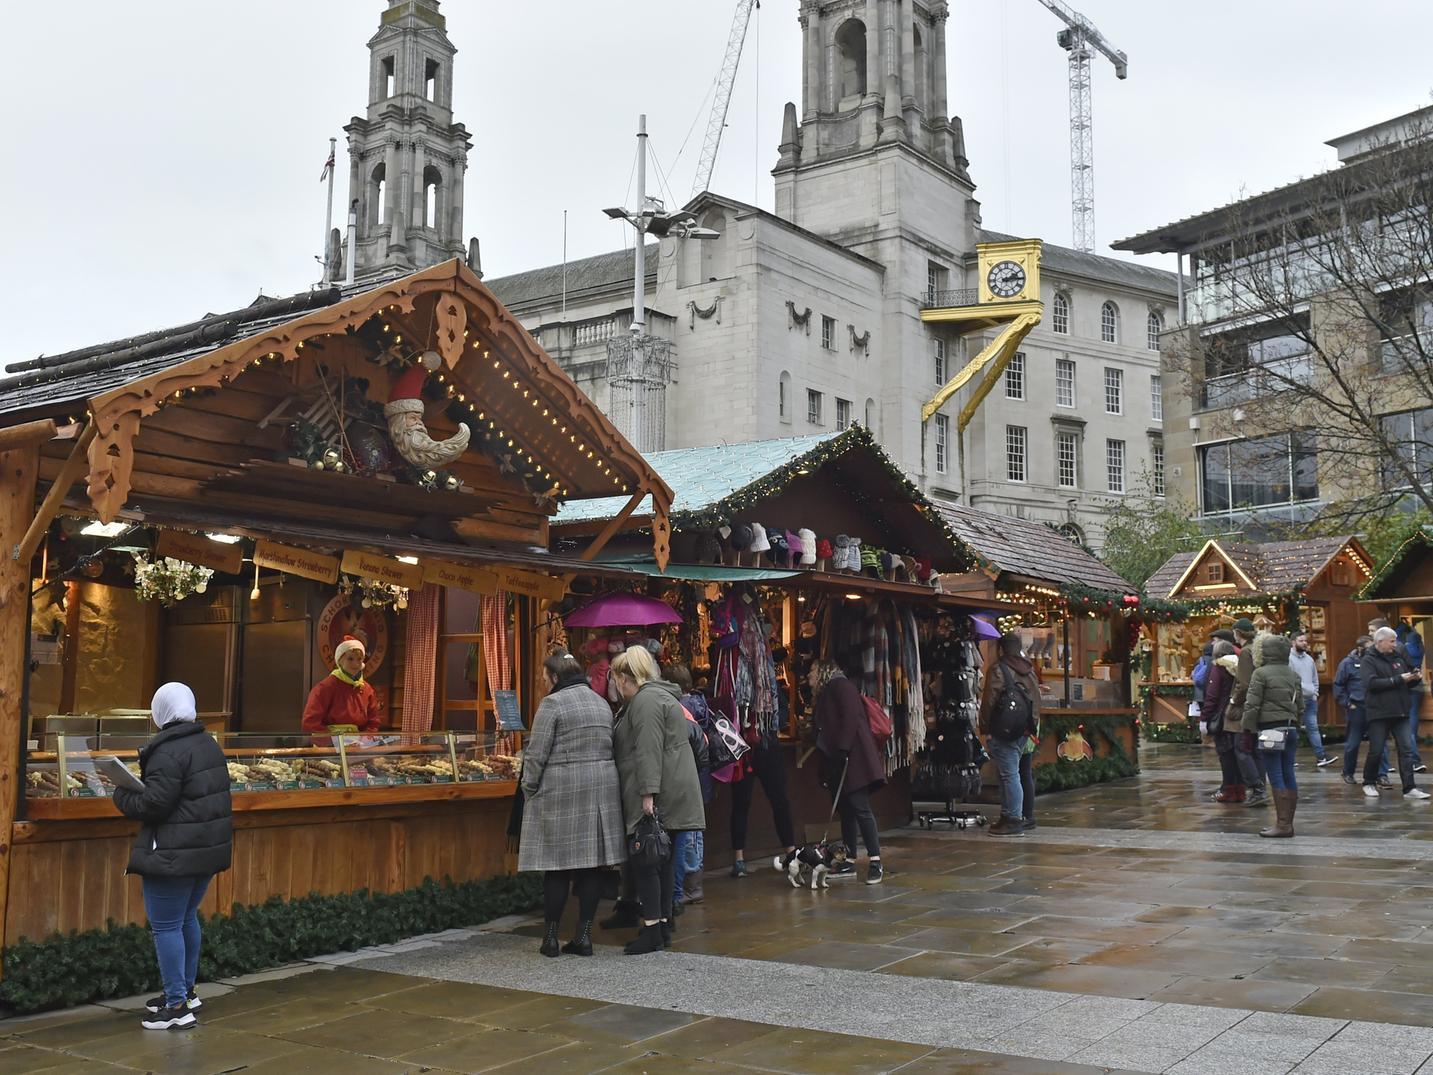 Beer? German sausage? waffle anyone? The Leeds Christmas Market is back at Millennium Square until Saturday, December 21.